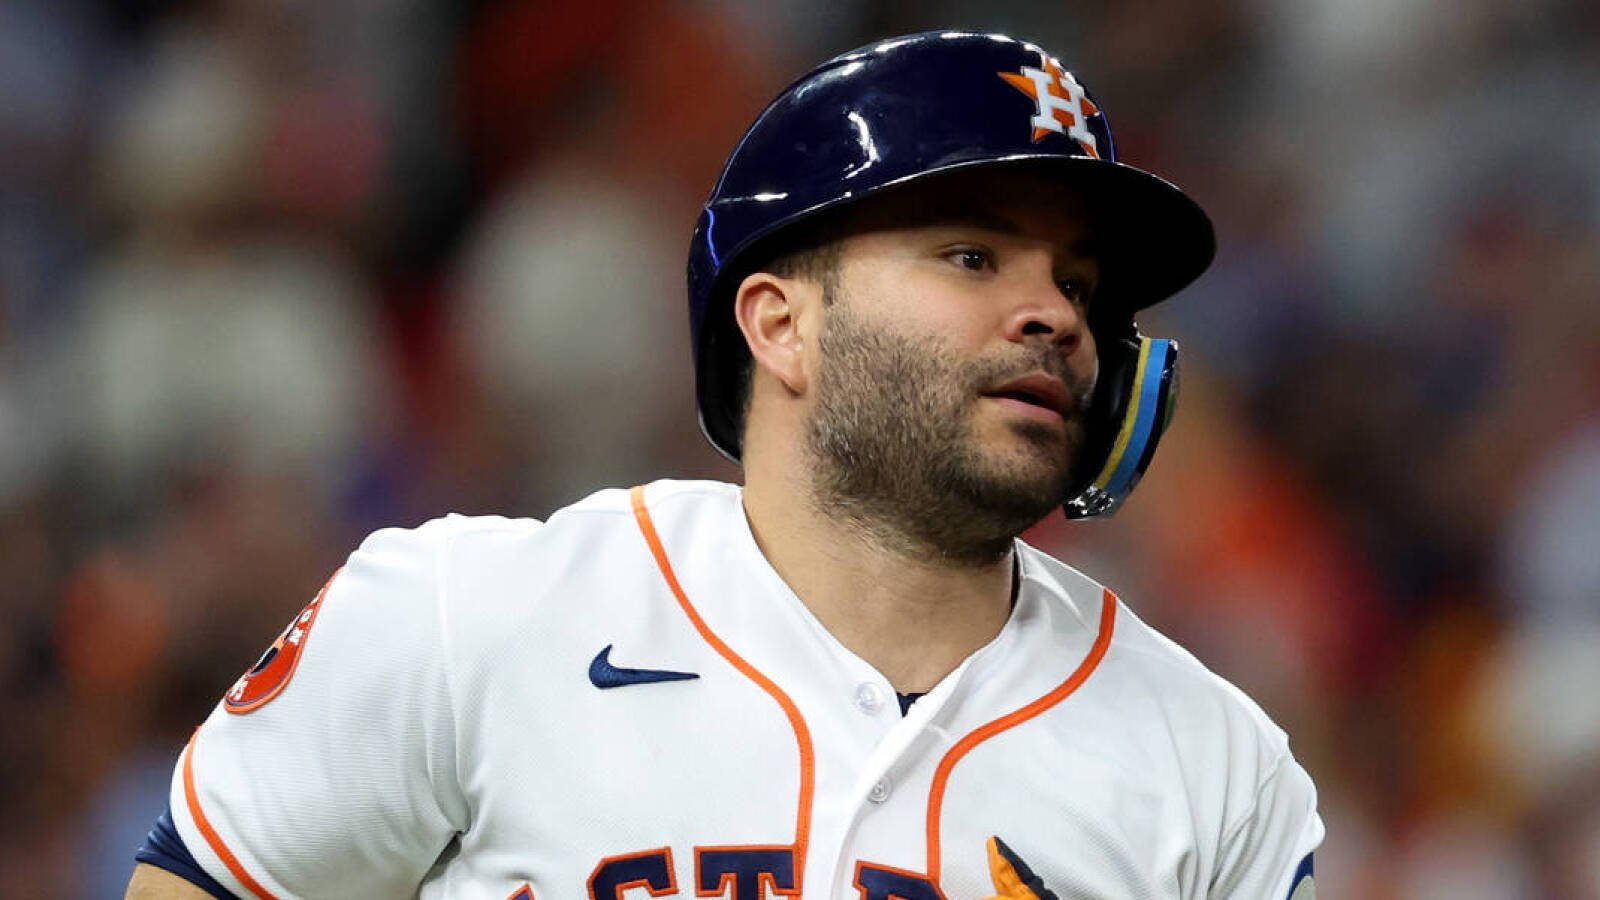 $125 million deal could mean Altuve plays whole career for Astros